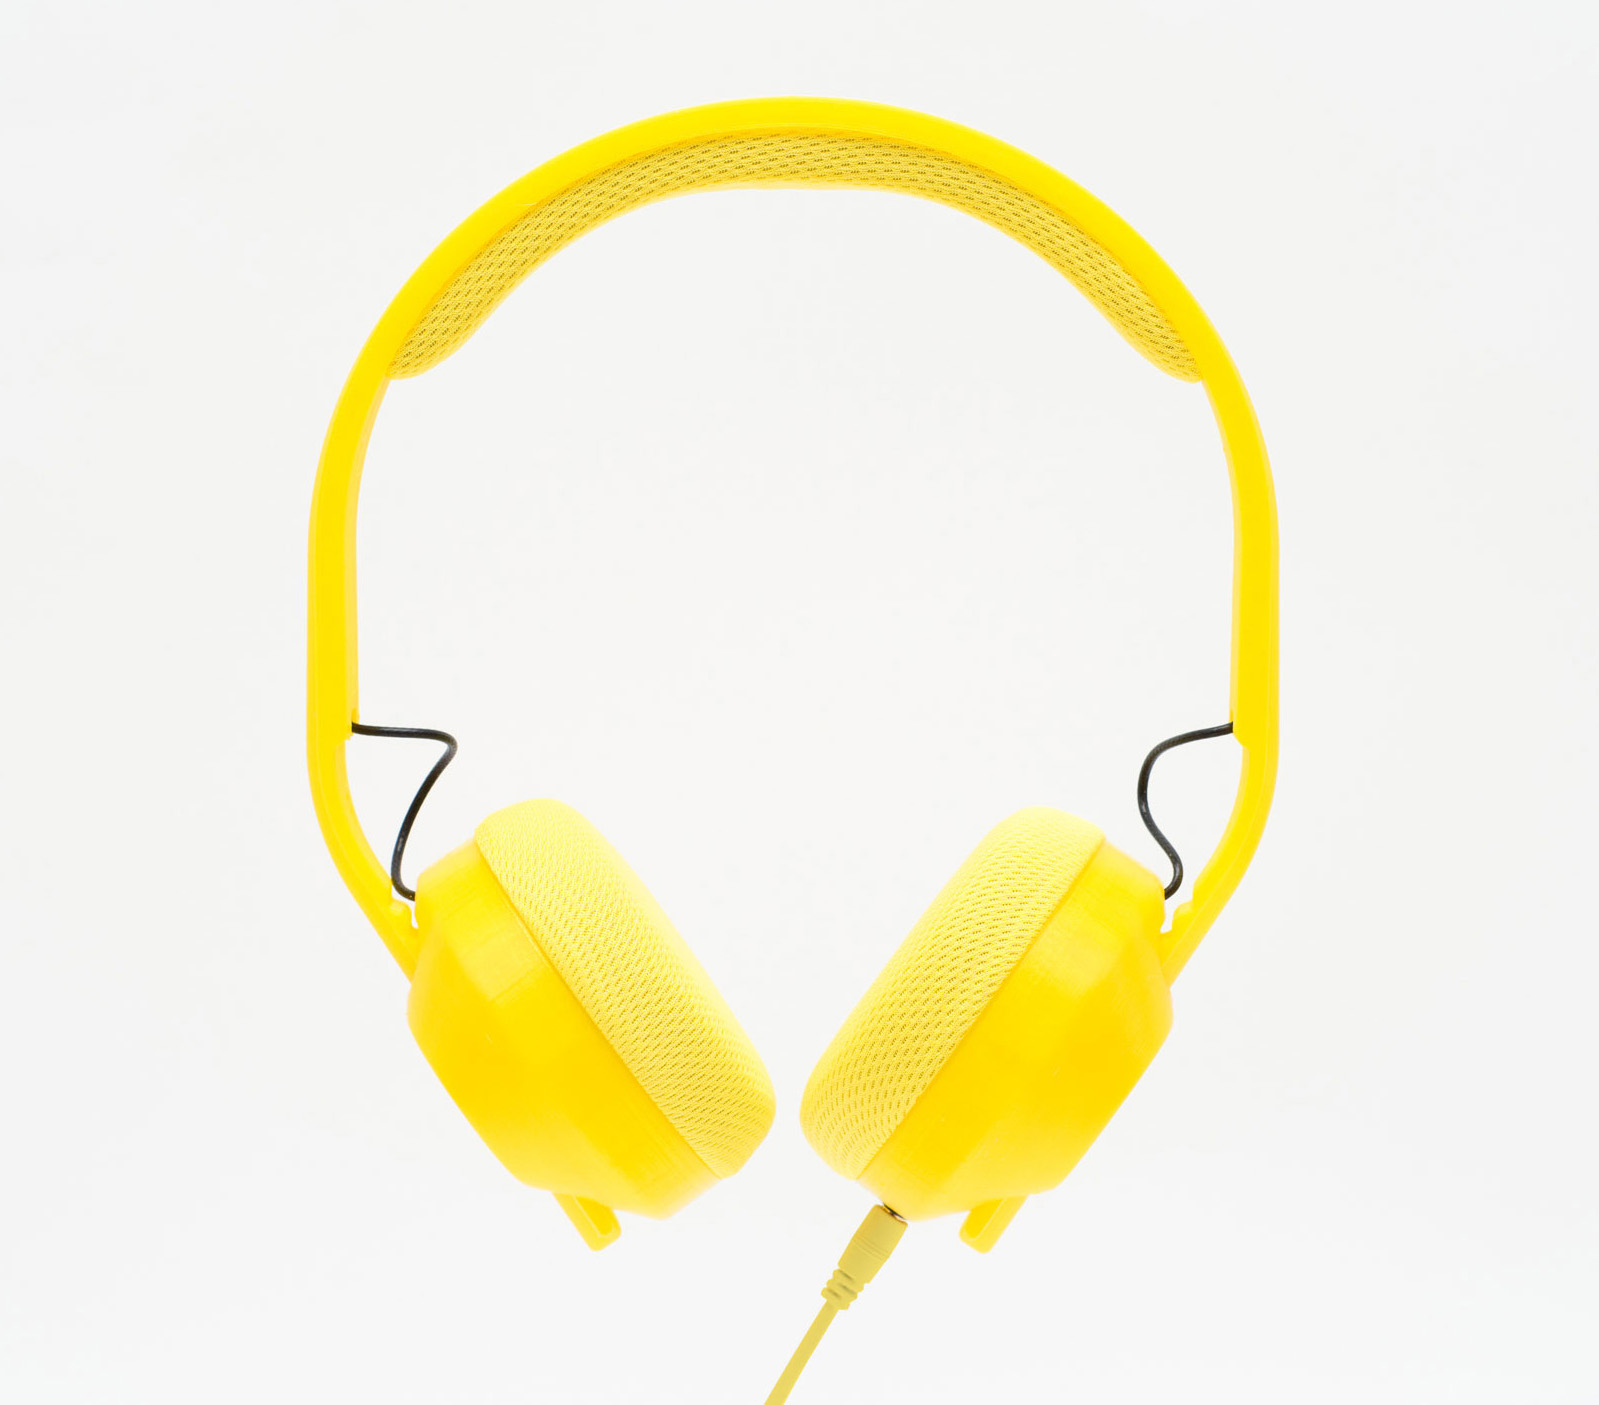 3D Print Your Own Color Customized Print+ Headphones